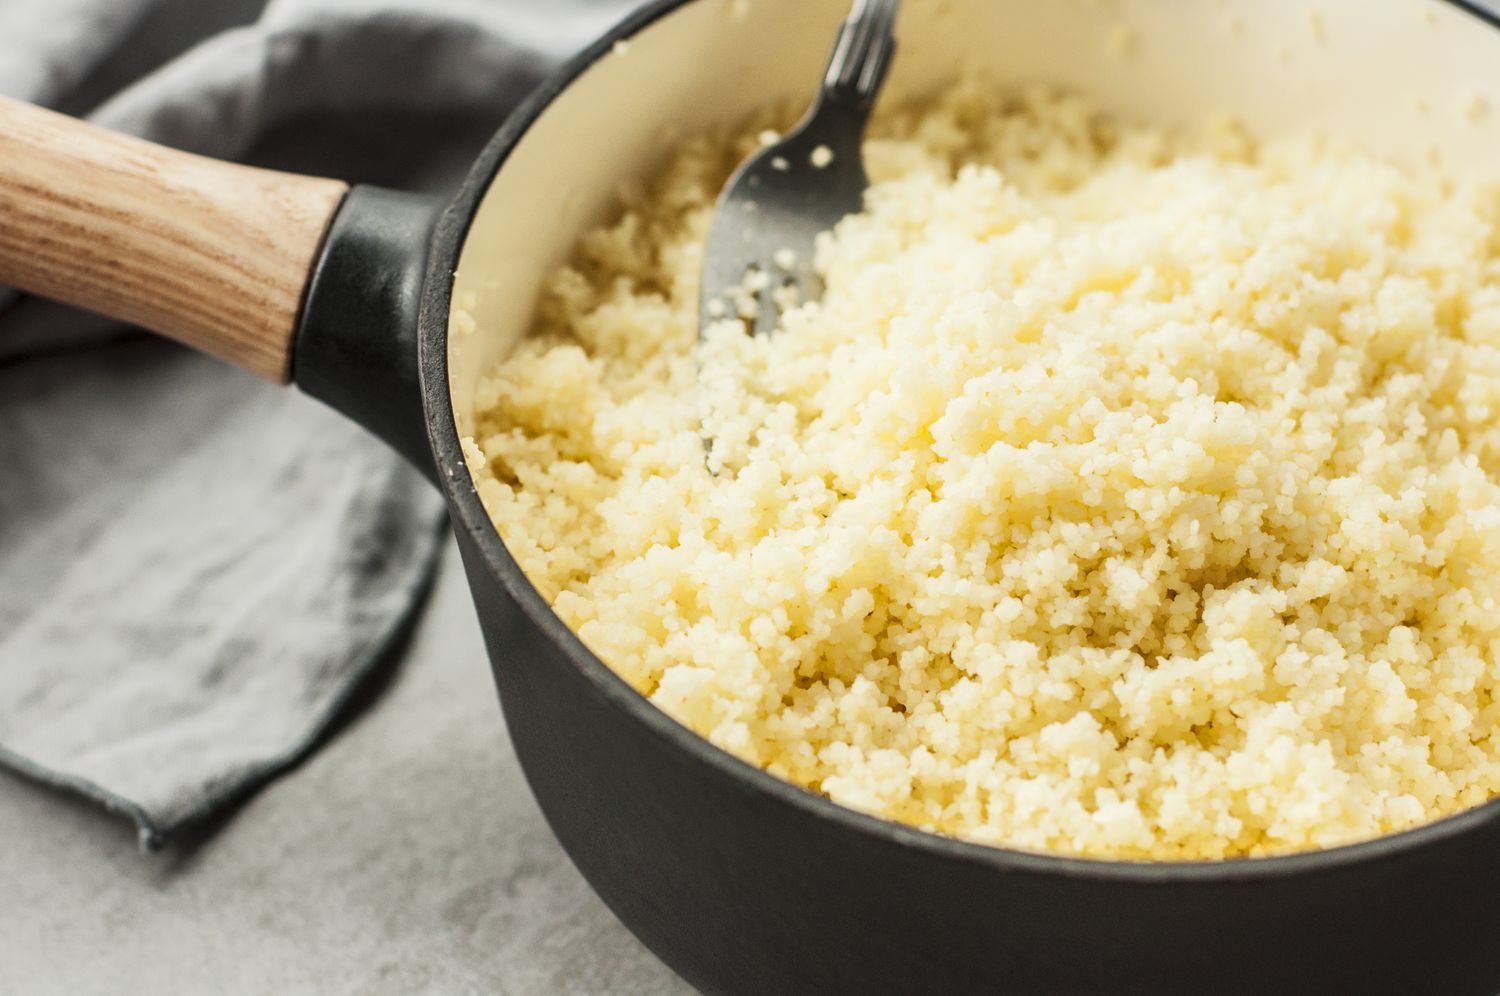 how-to-cook-couscous